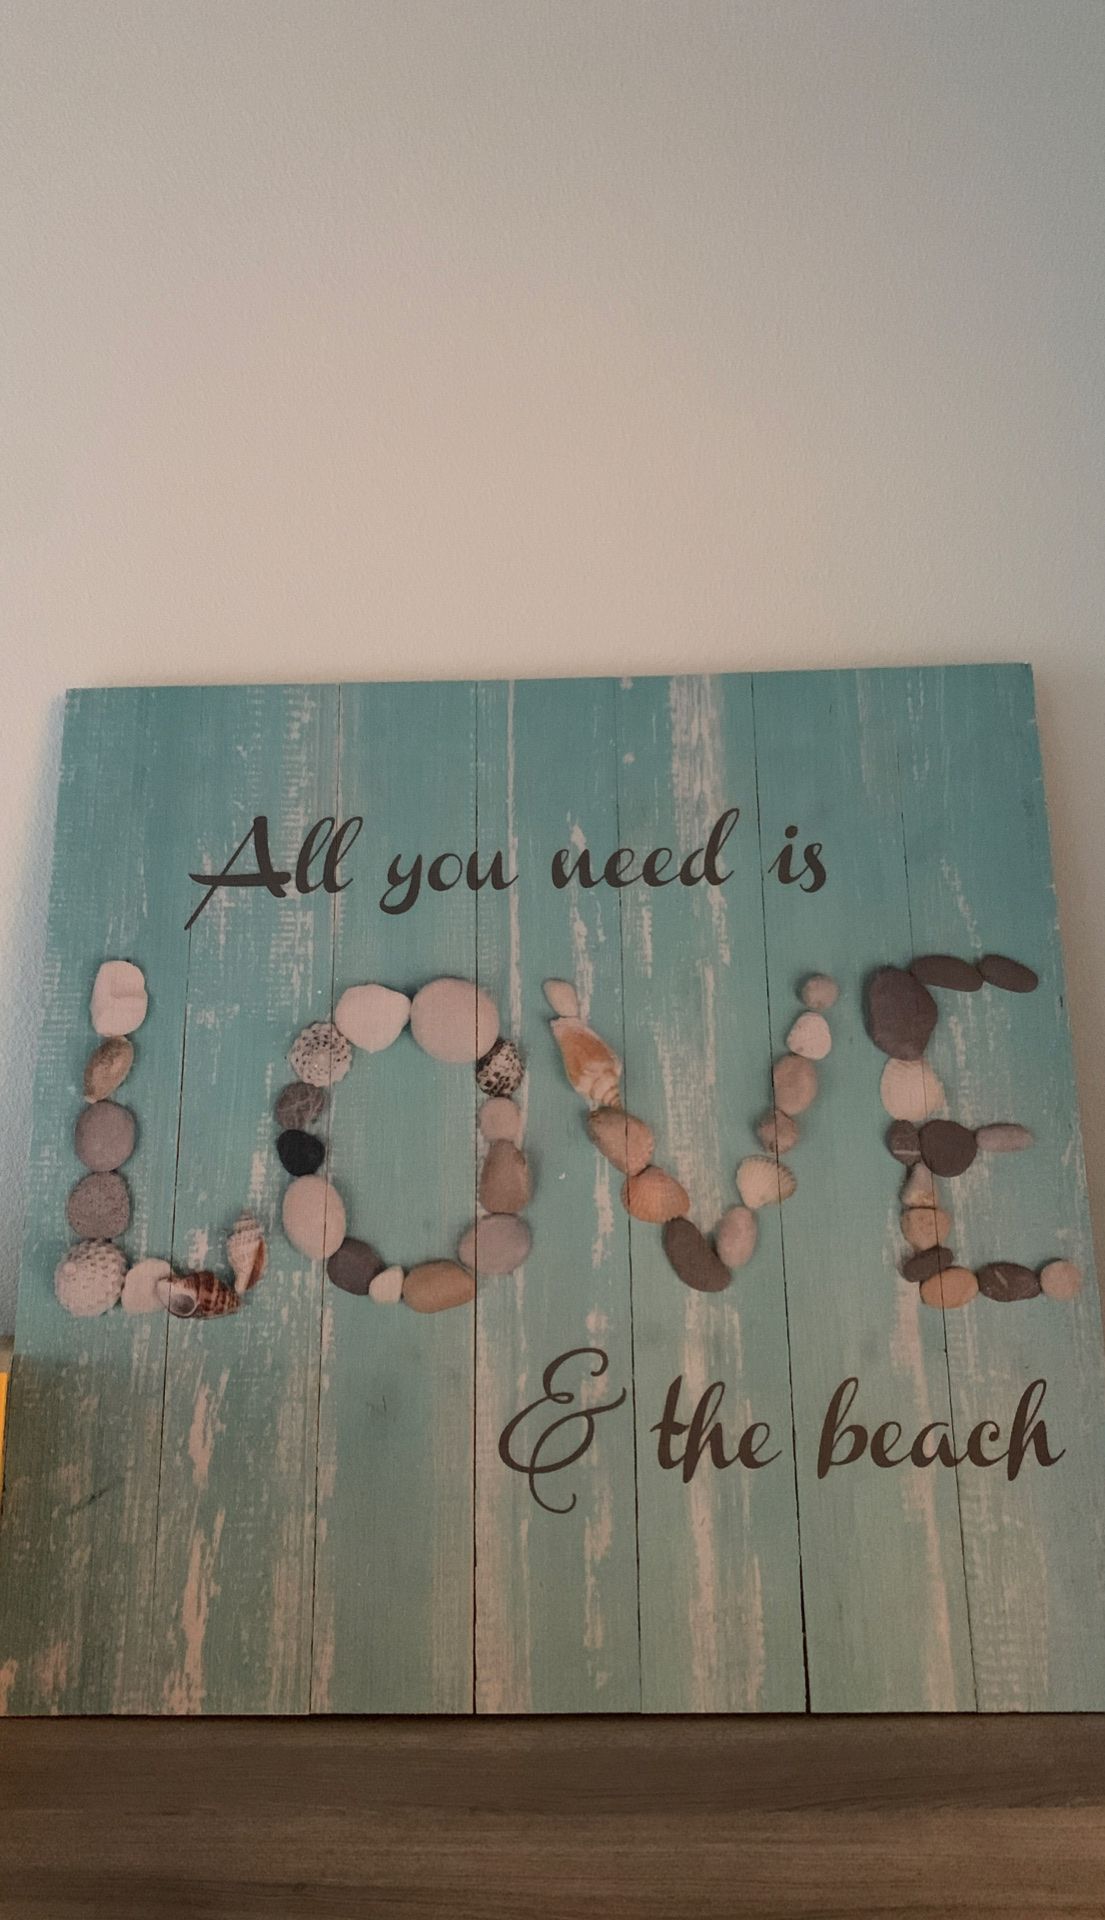 All you need is love and the beach picture